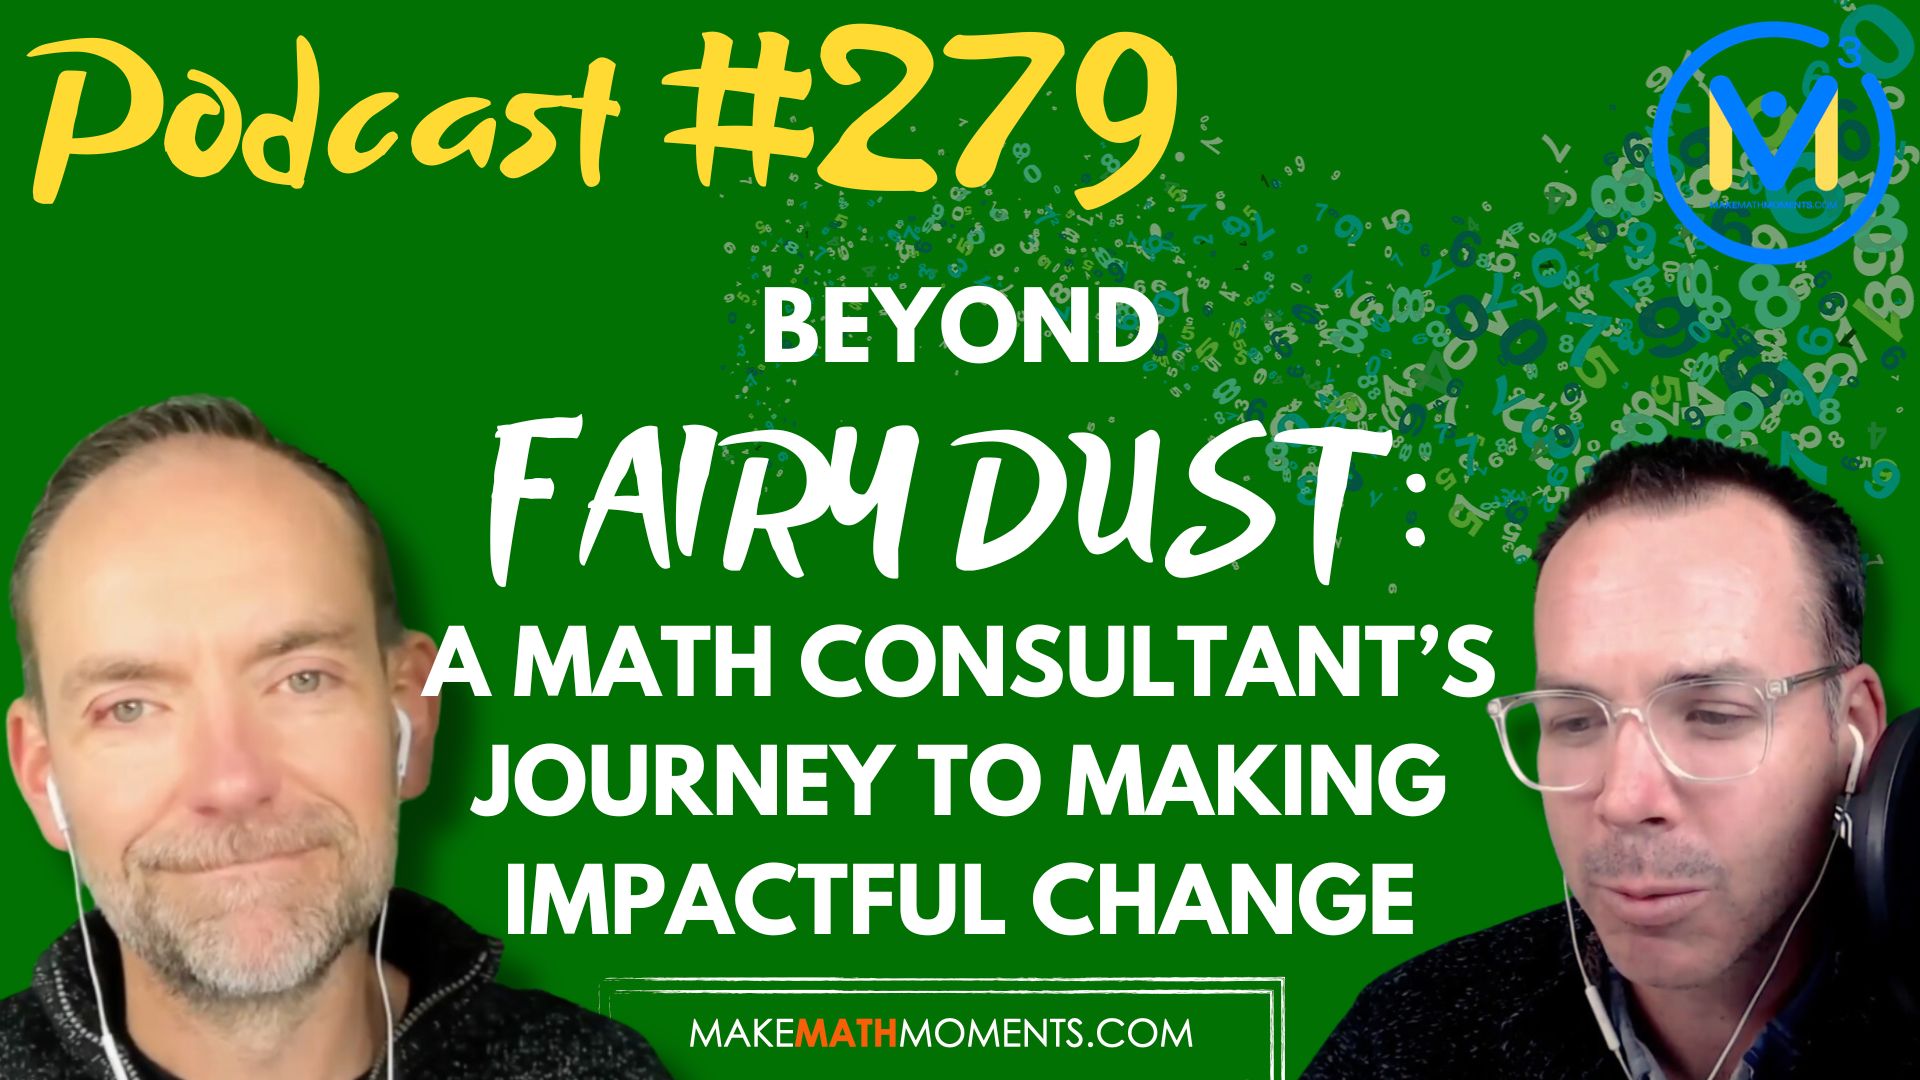 Episode #279: Beyond Fairy Dust: A Math Consultant’s Journey to Making Impactful Change